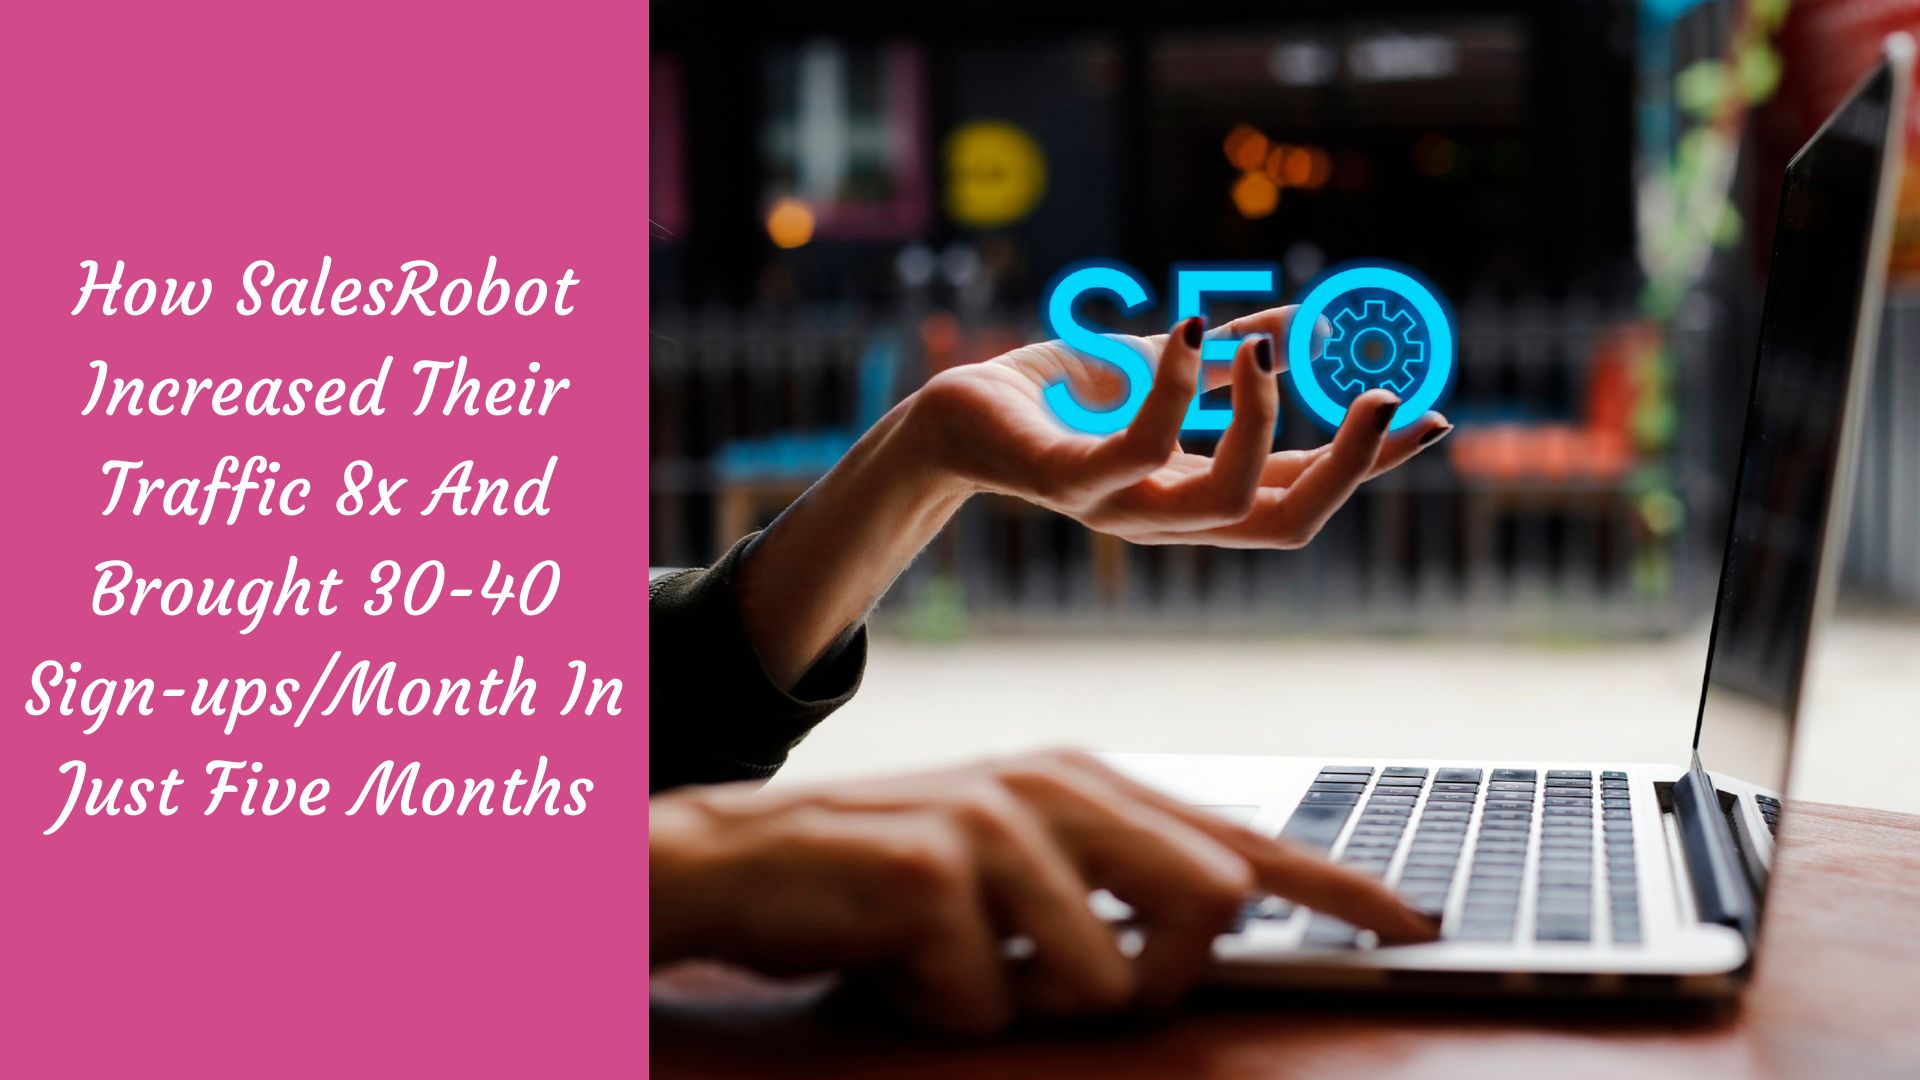 You are currently viewing How SalesRobot Increased Their Traffic 8x And Brought 30-40 Sign-ups/Month In Just Five Months